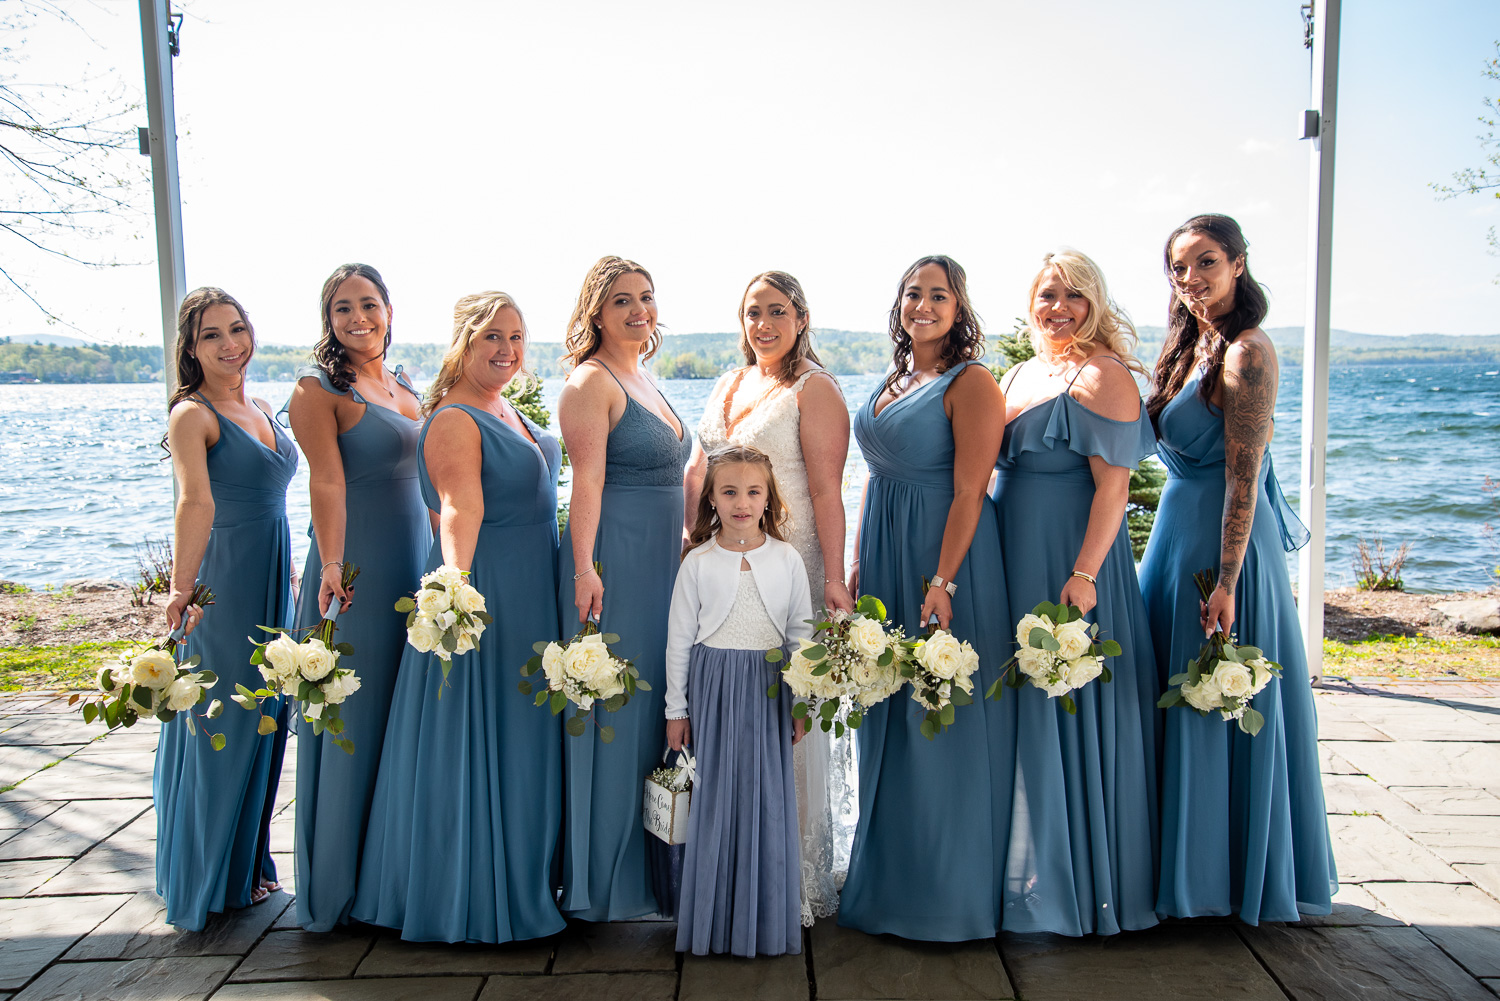 Bride, bridesmaids and flower girl after the lakeside wedding 